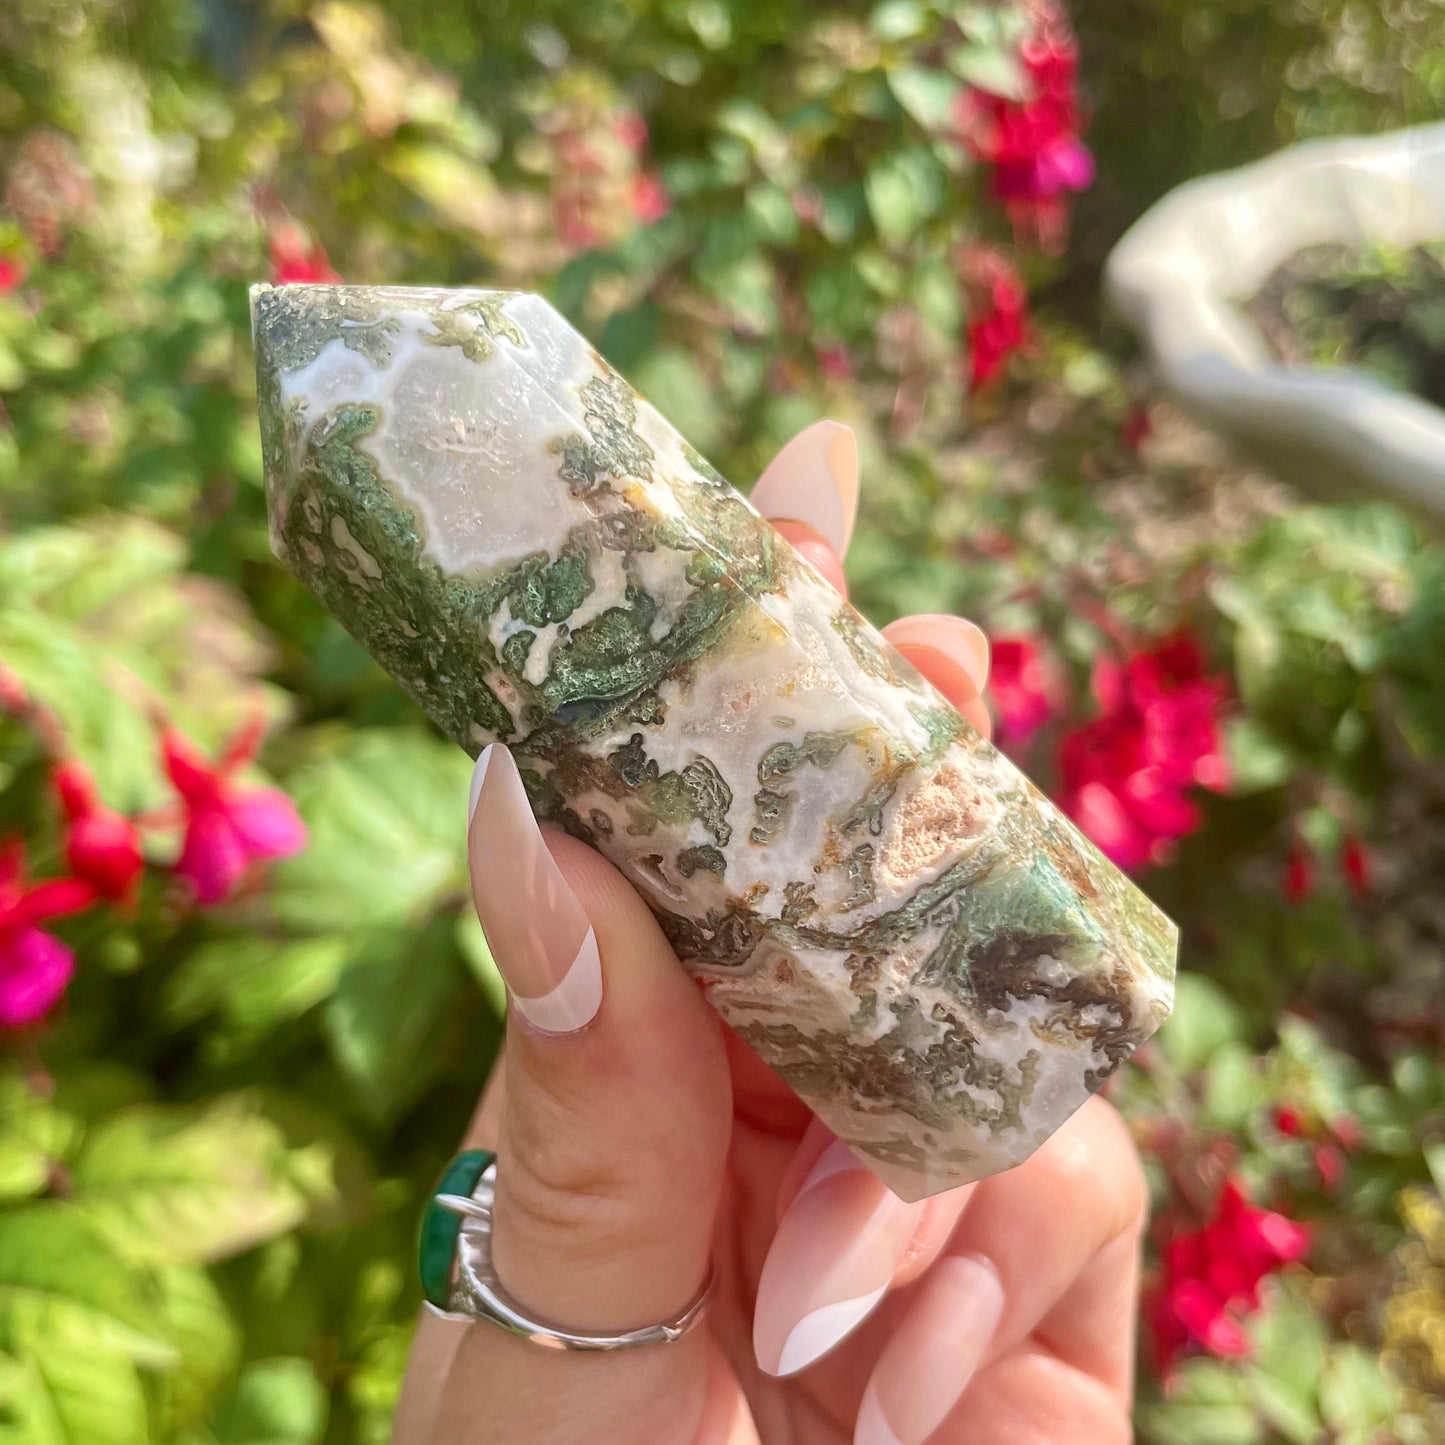 Moss Agate Towers - choose your own!